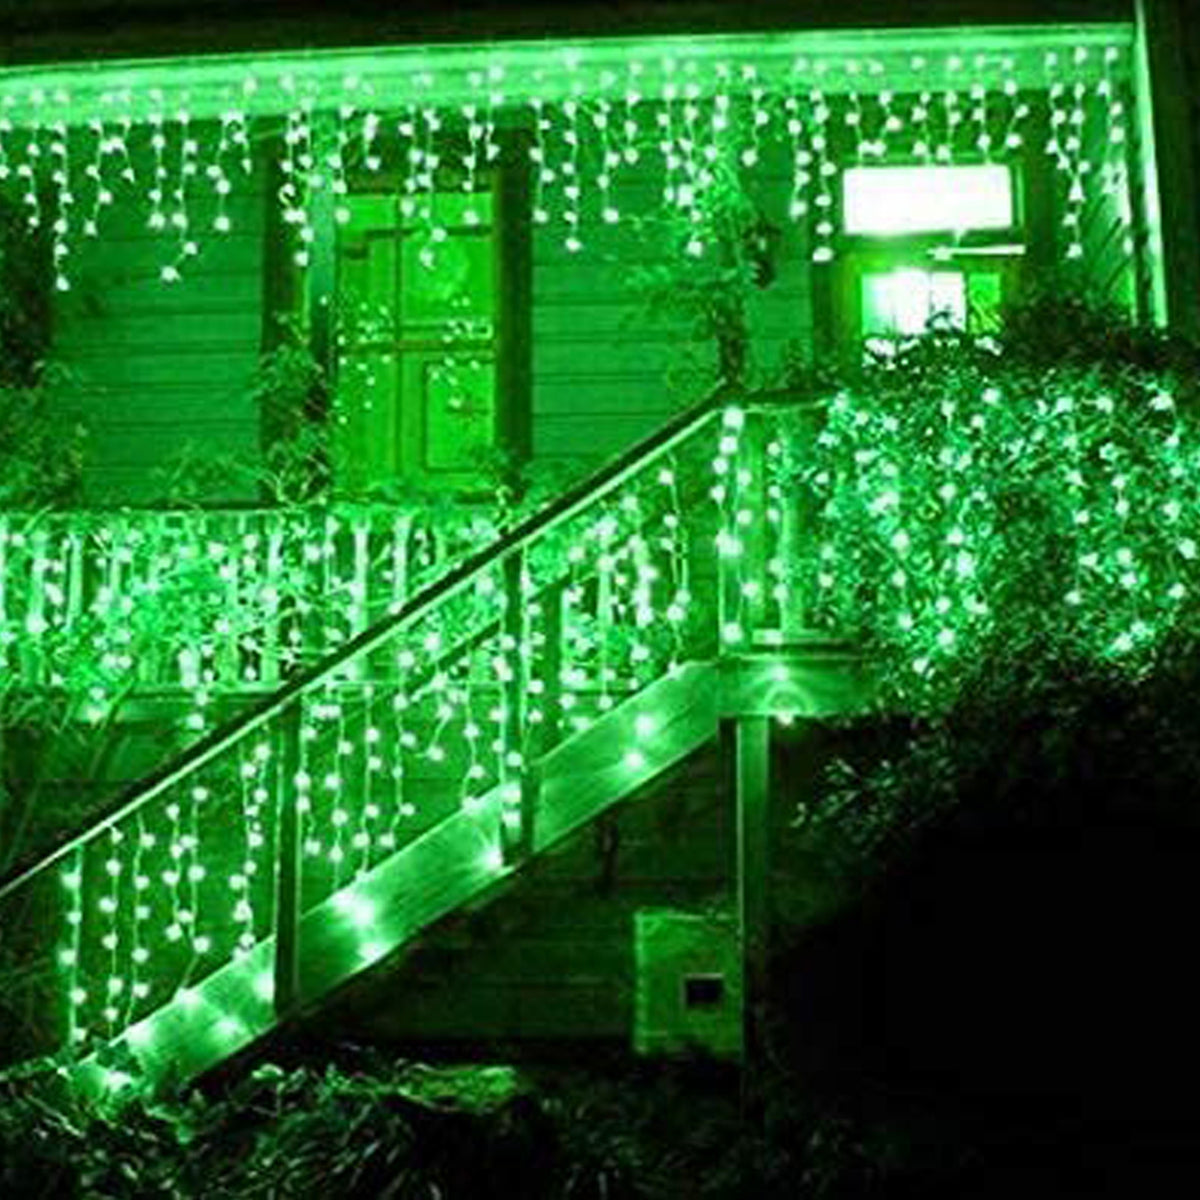 DecorTwist LED String Light for Home and Office Decor| Indoor & Outdoor Decorative Lights|Christmas |Diwali |Wedding | Christmas | Diwali | Wedding |12 Meter Length | (Green)